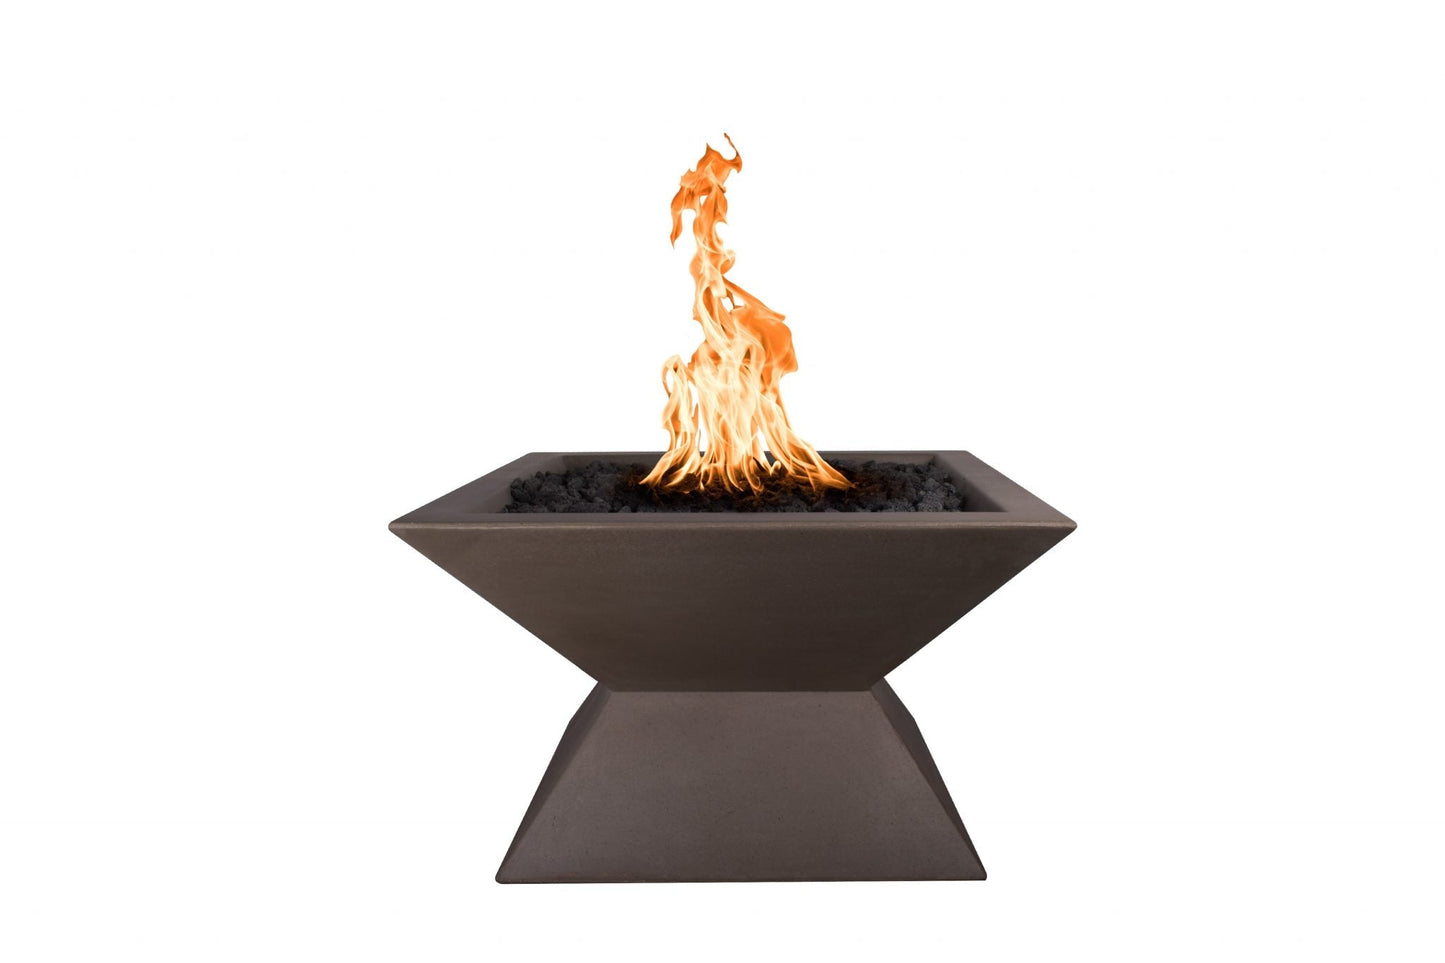 The Outdoor Plus Square Uxmal 30" Metallic Bronze GFRC Concrete Liquid Propane Fire Pit with 12V Electronic Ignition